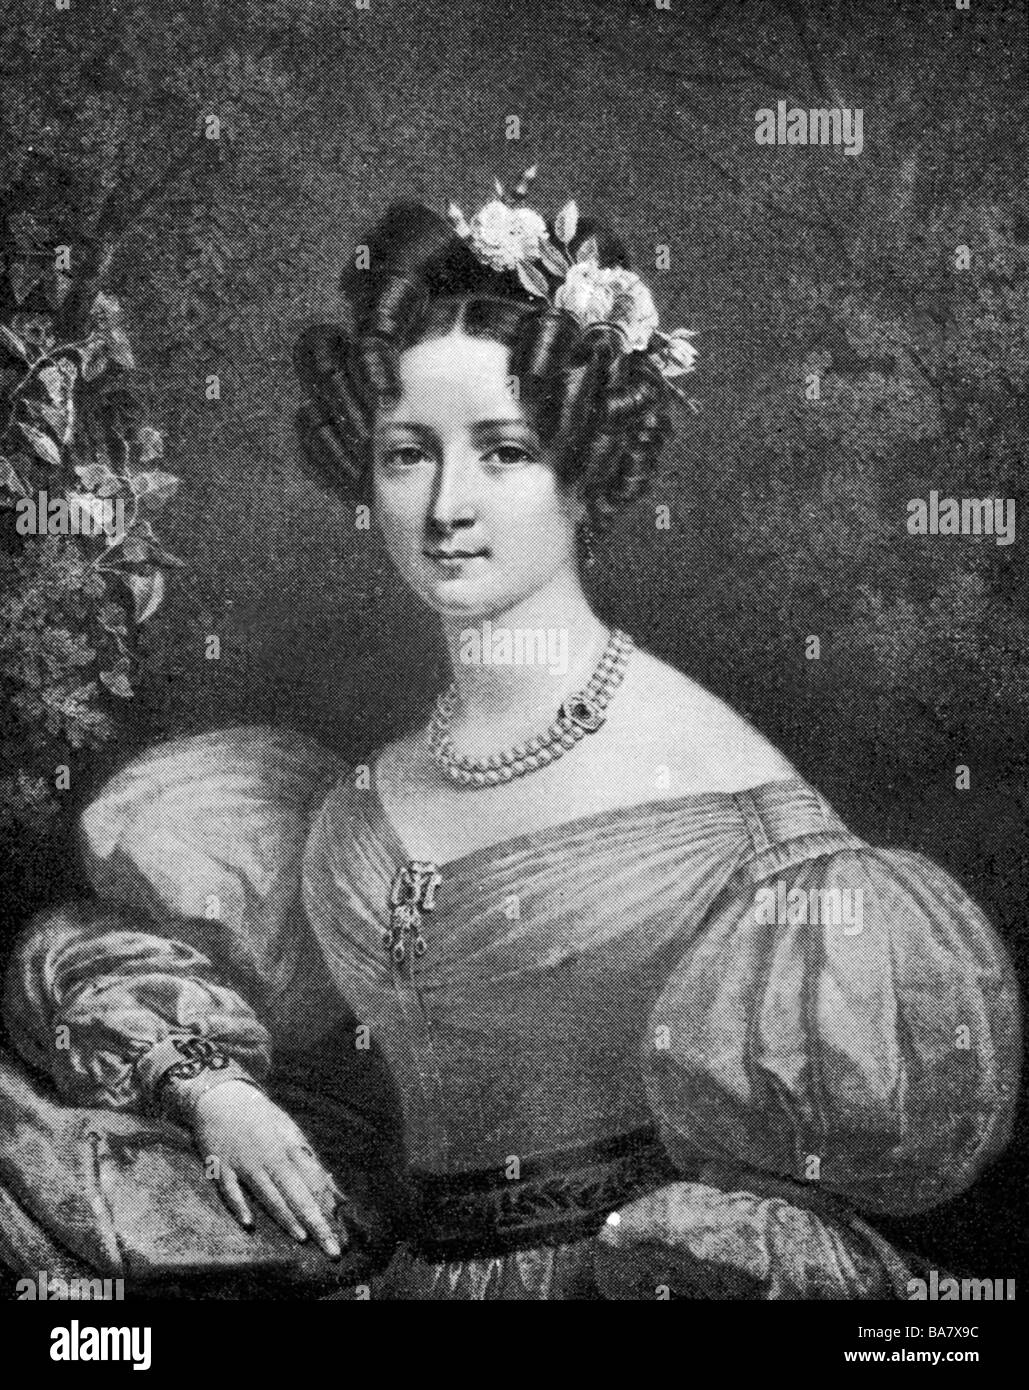 Taglioni, Maria, 23.4.1804 - 2.3.1884, Italian dancer, half length, after a lithograph by Pierre Vigneron, 19th century, Stock Photo